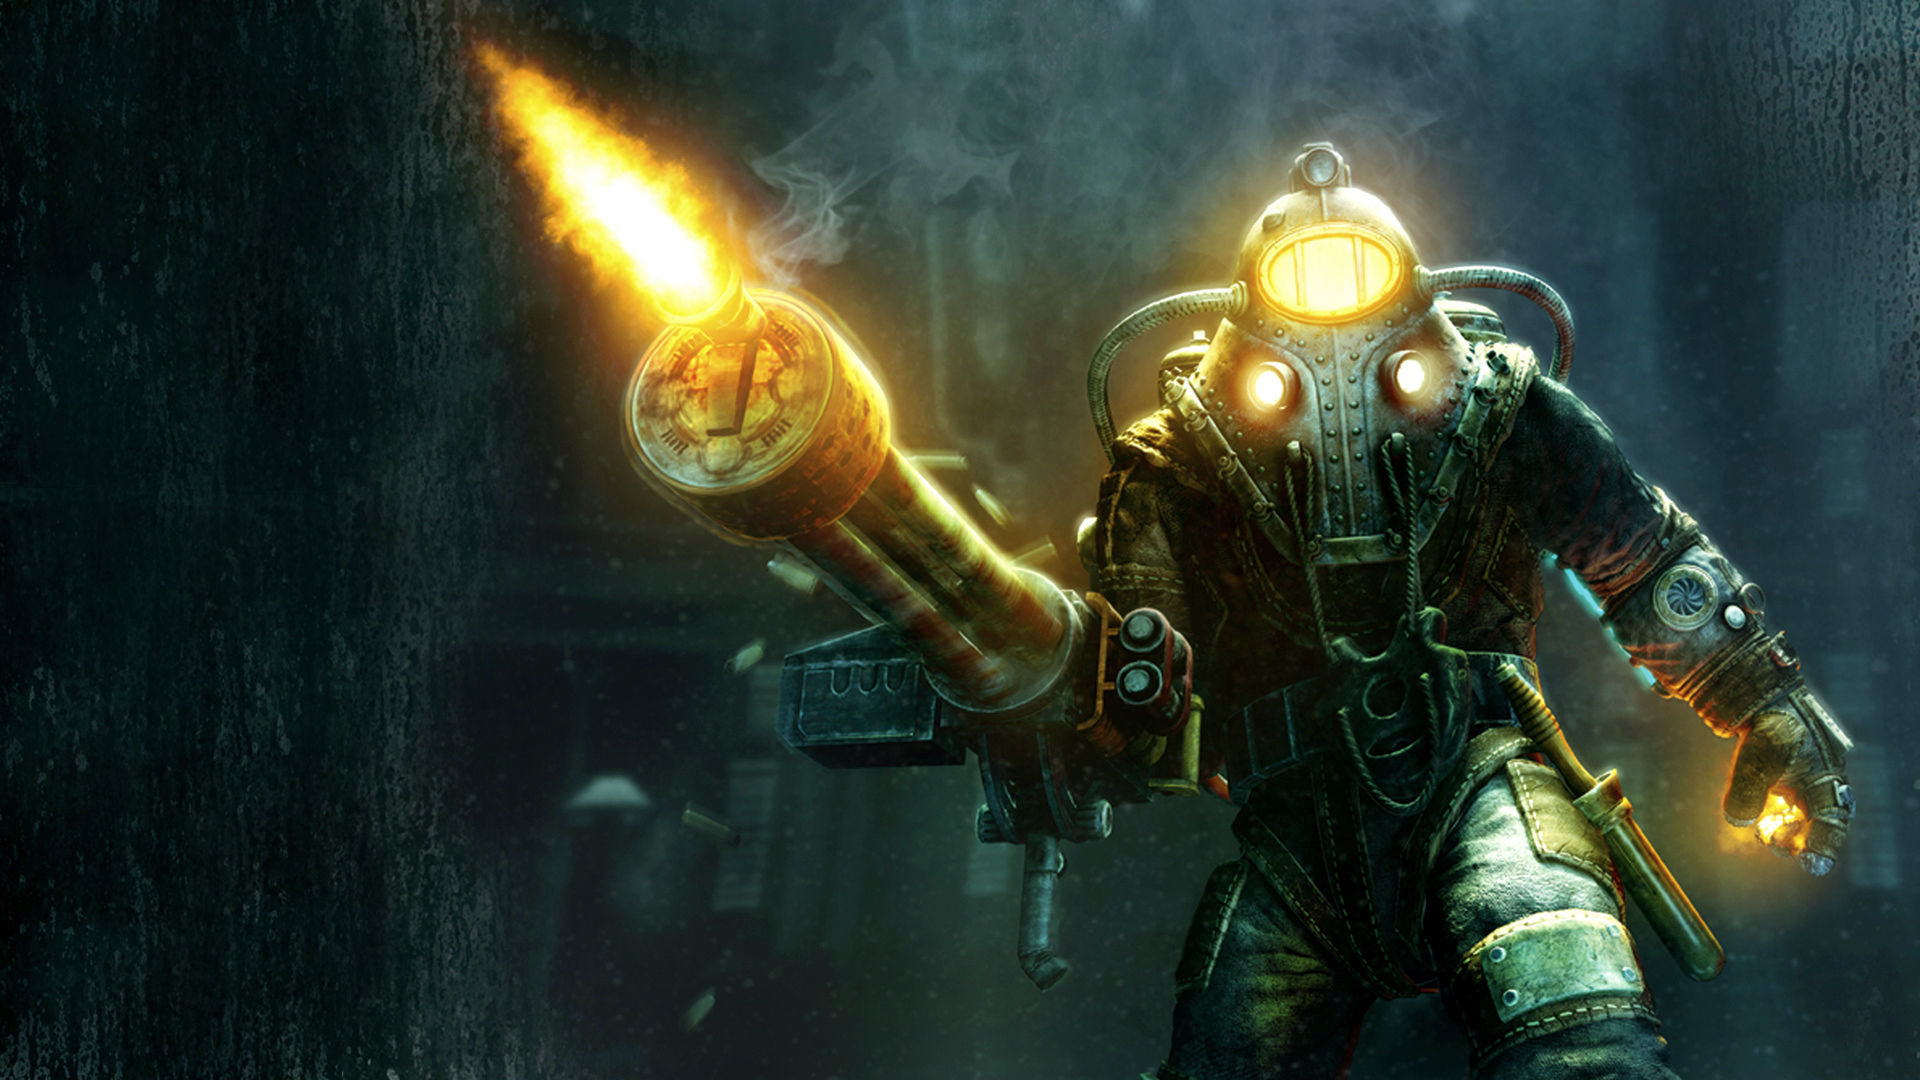 Awesome Bioshock 2 free background ID:323183 for hd 1920x1080 desktop